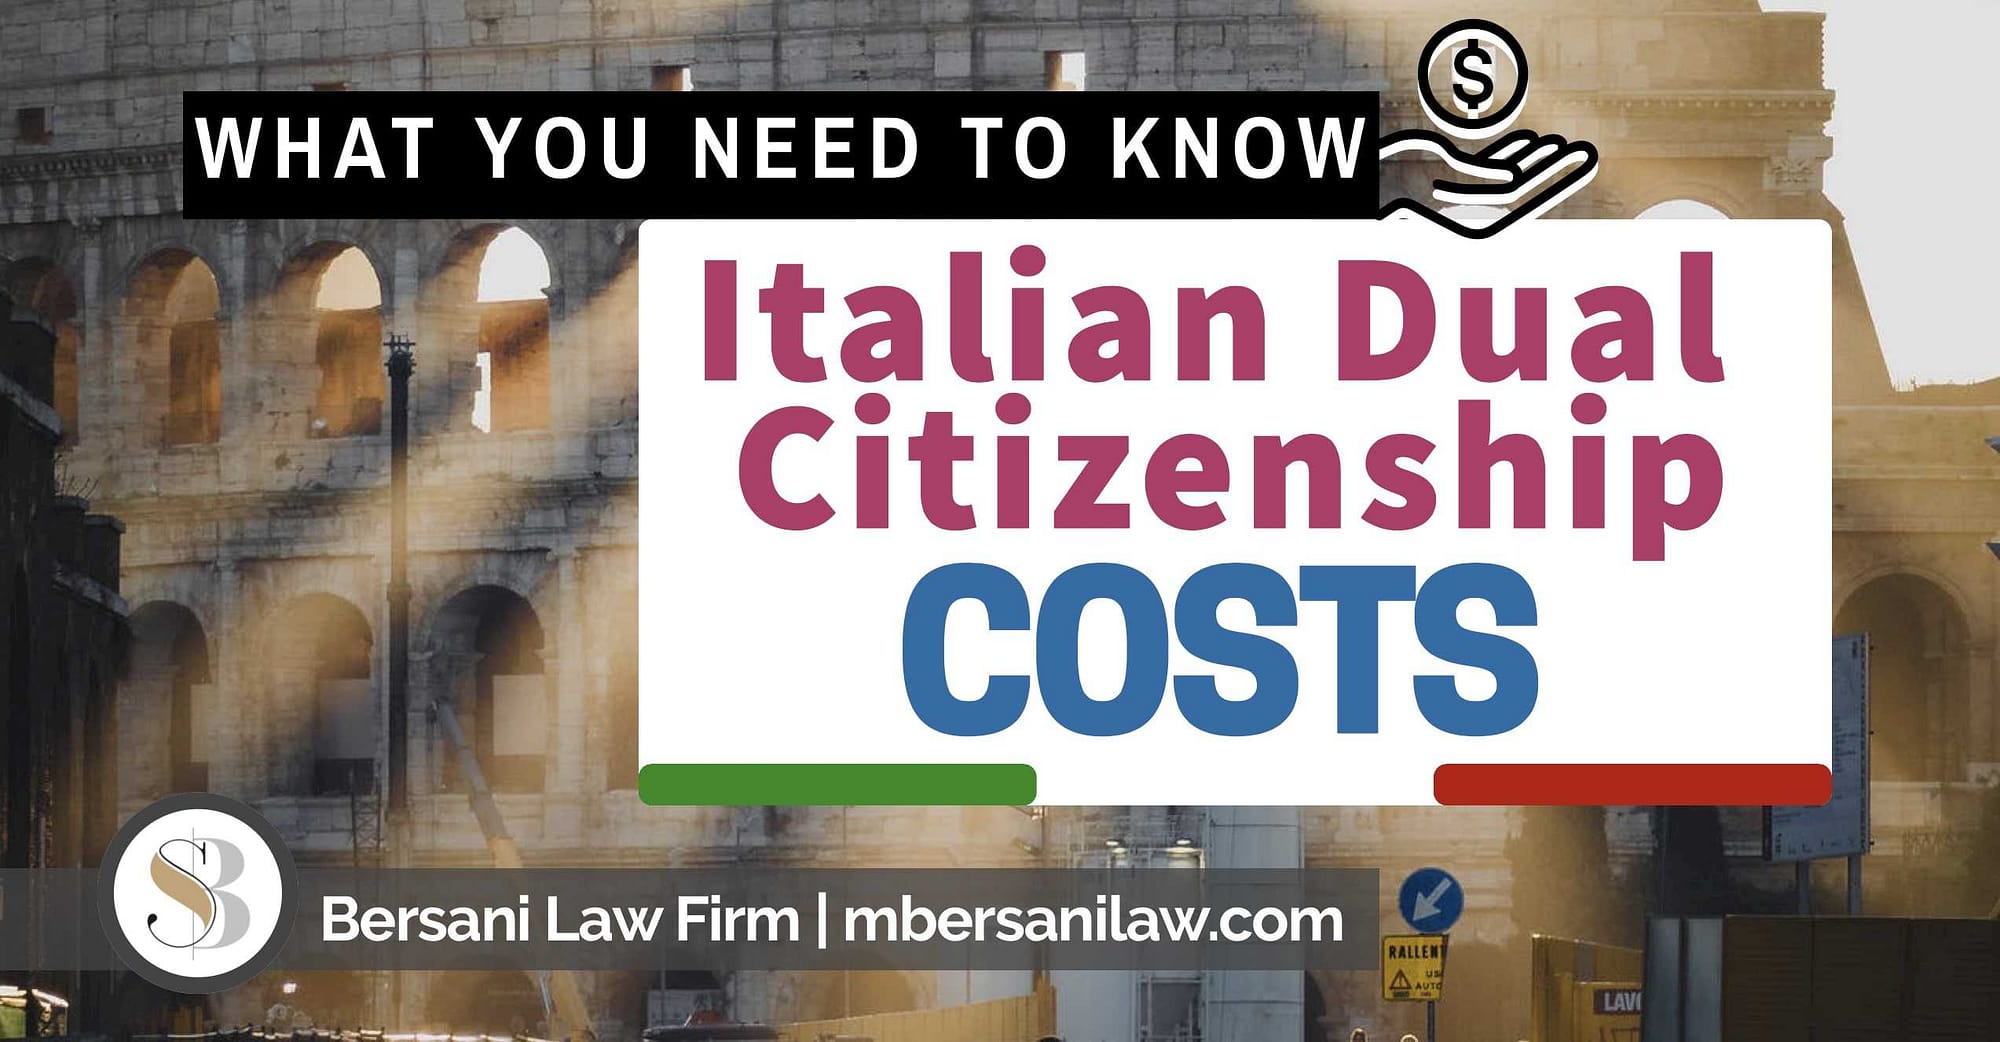 Italian Dual Citizenship Cost 2021 [THE HUGE FULL GUIDE]